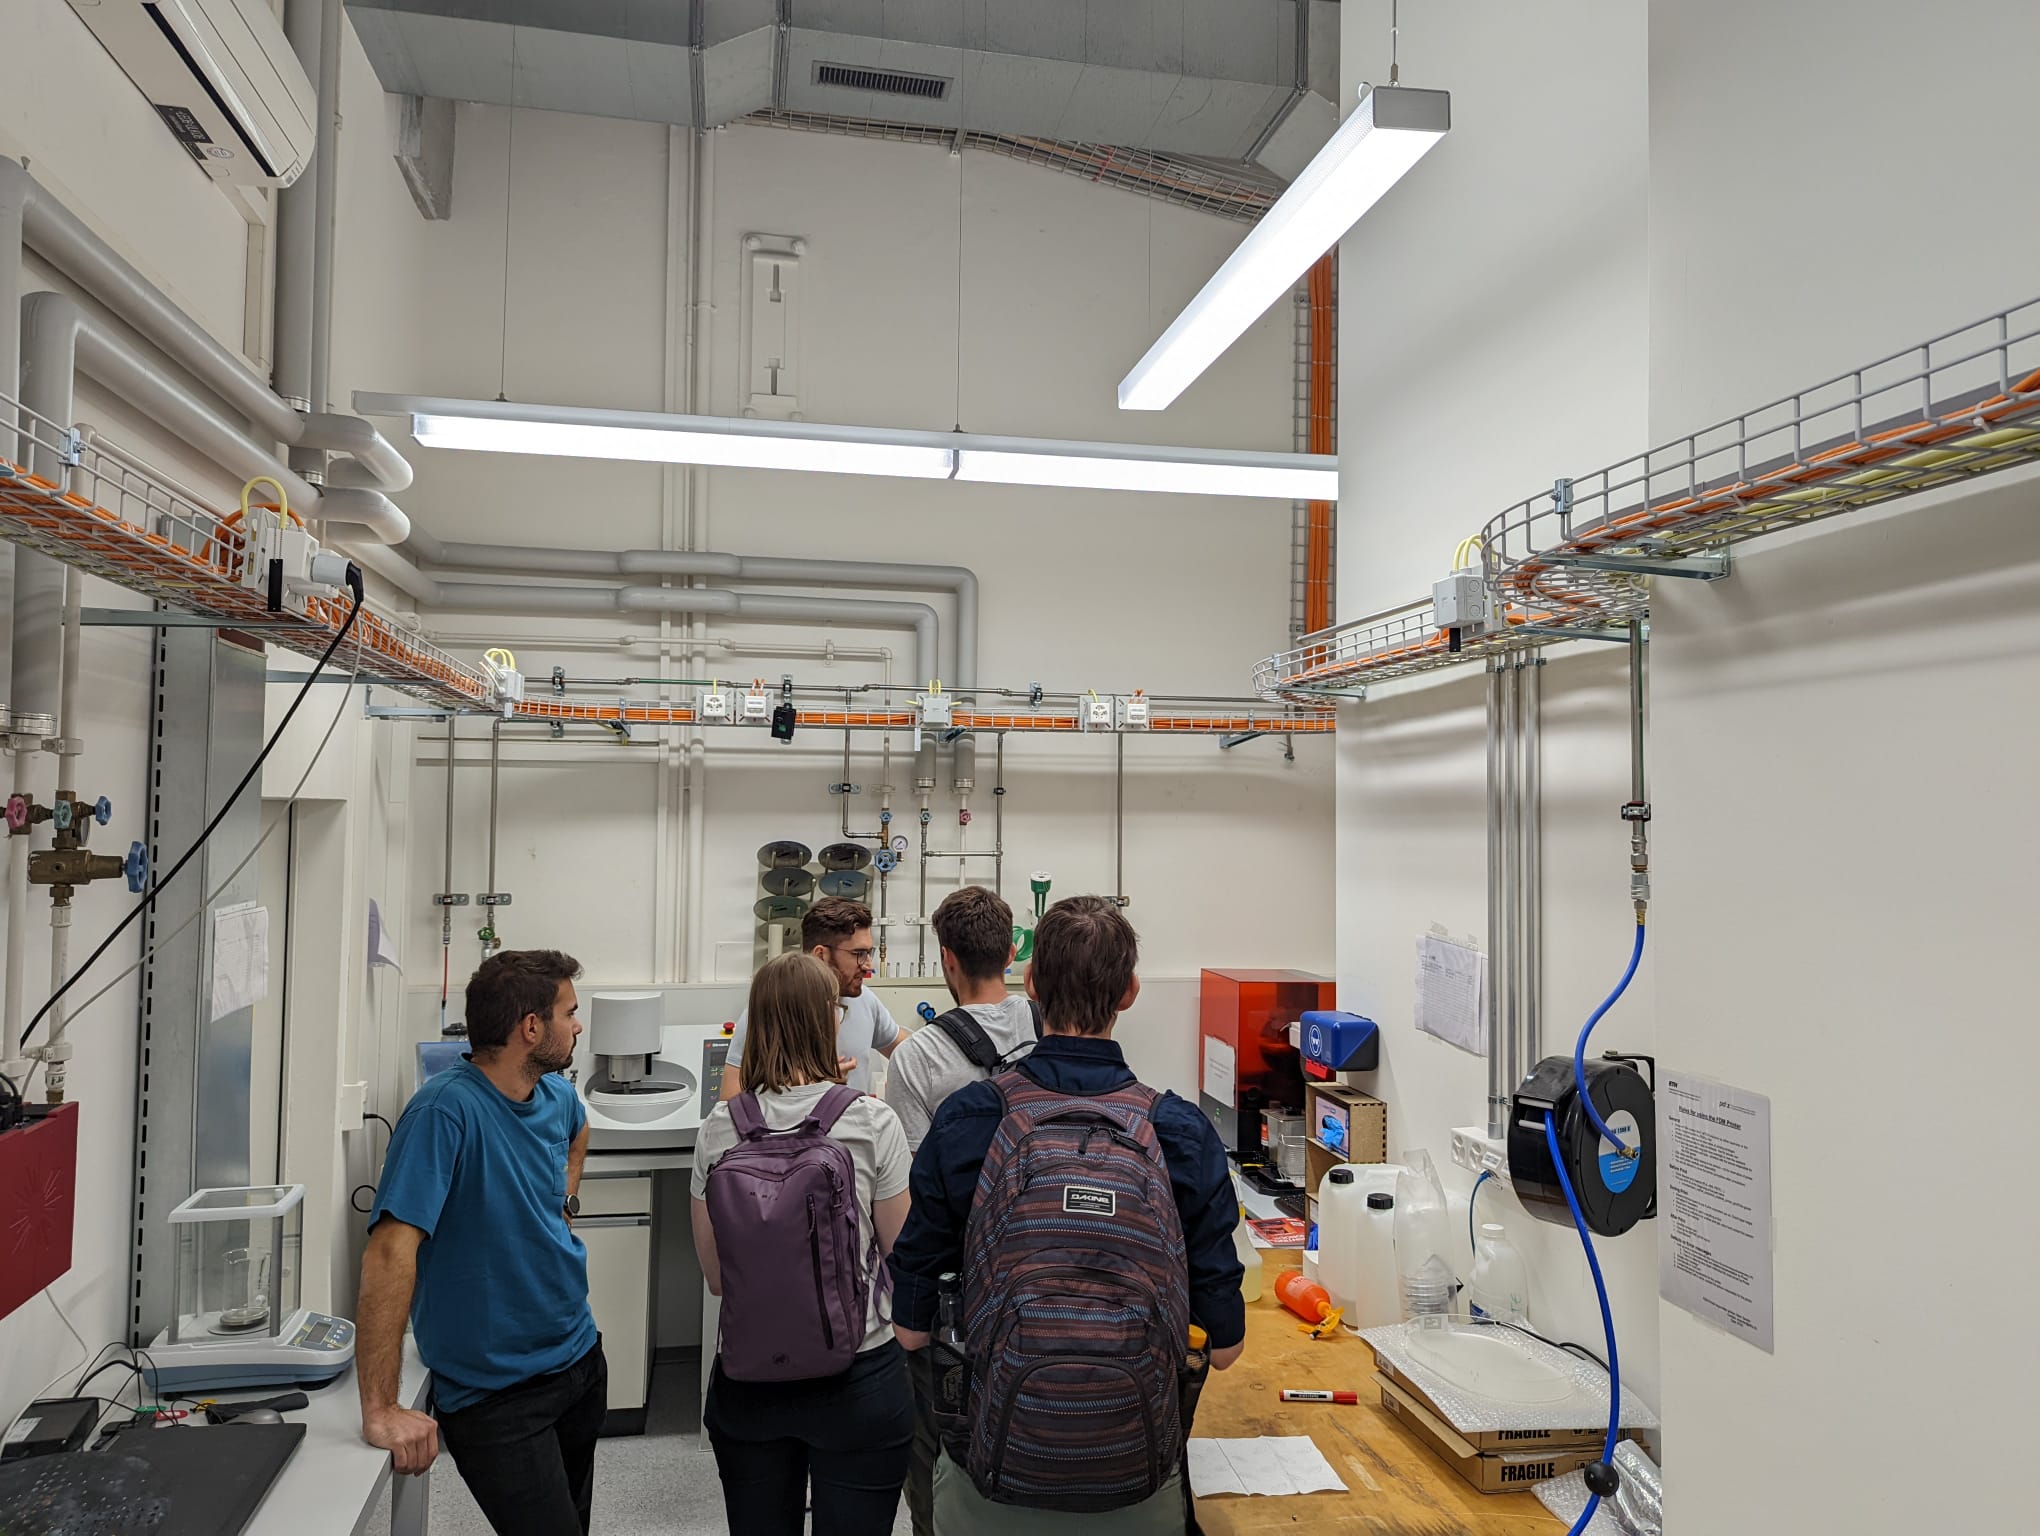 Visit to the pd|z Product Development Group Zurich labs at ETH Zentrum